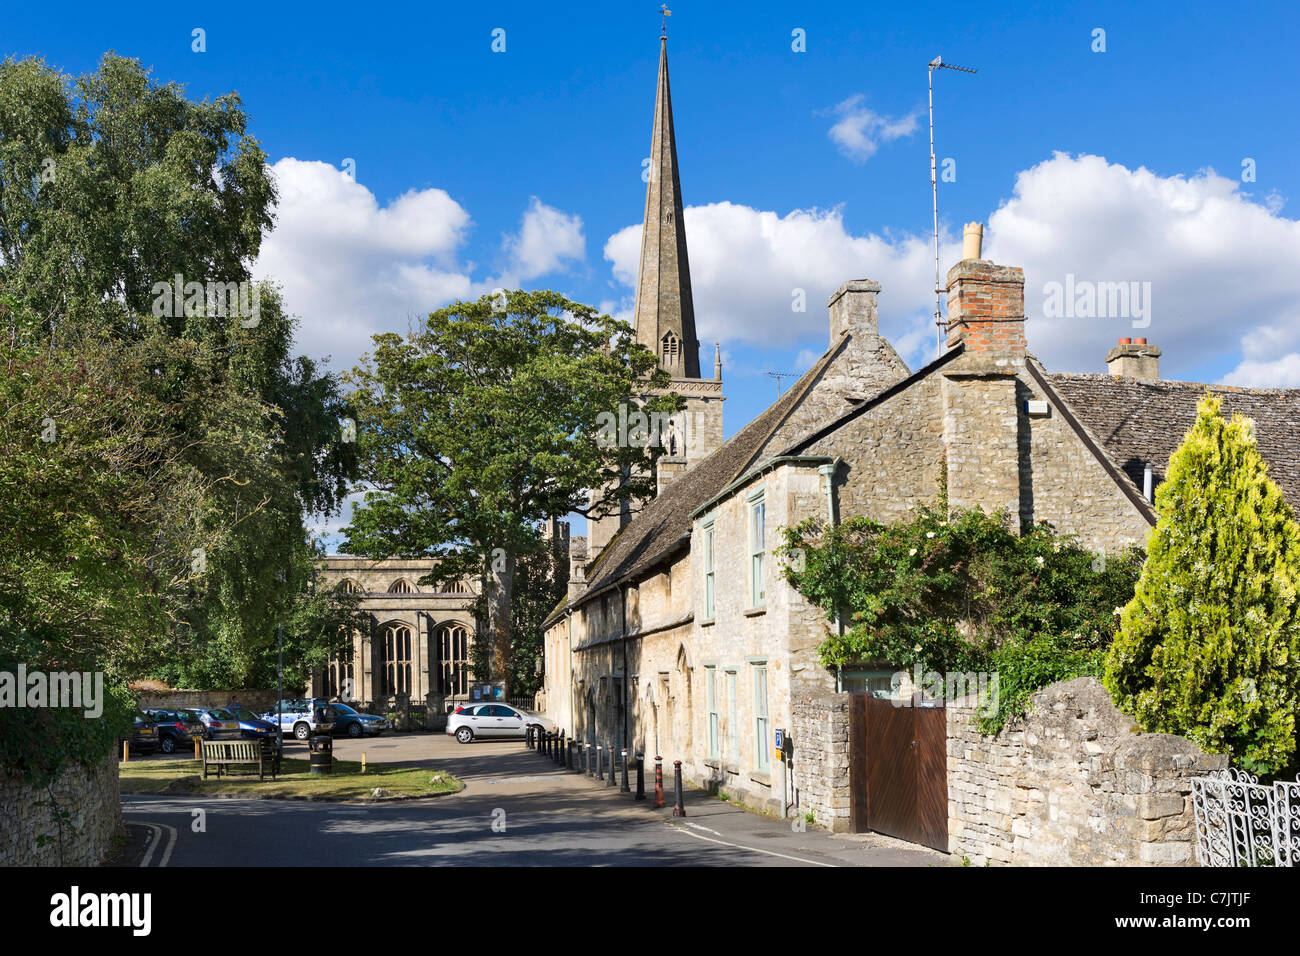 View towards St John the Baptist parish church on Church Lane in the Cotswold town of Burford, Oxfordshire, England, UK Stock Photo